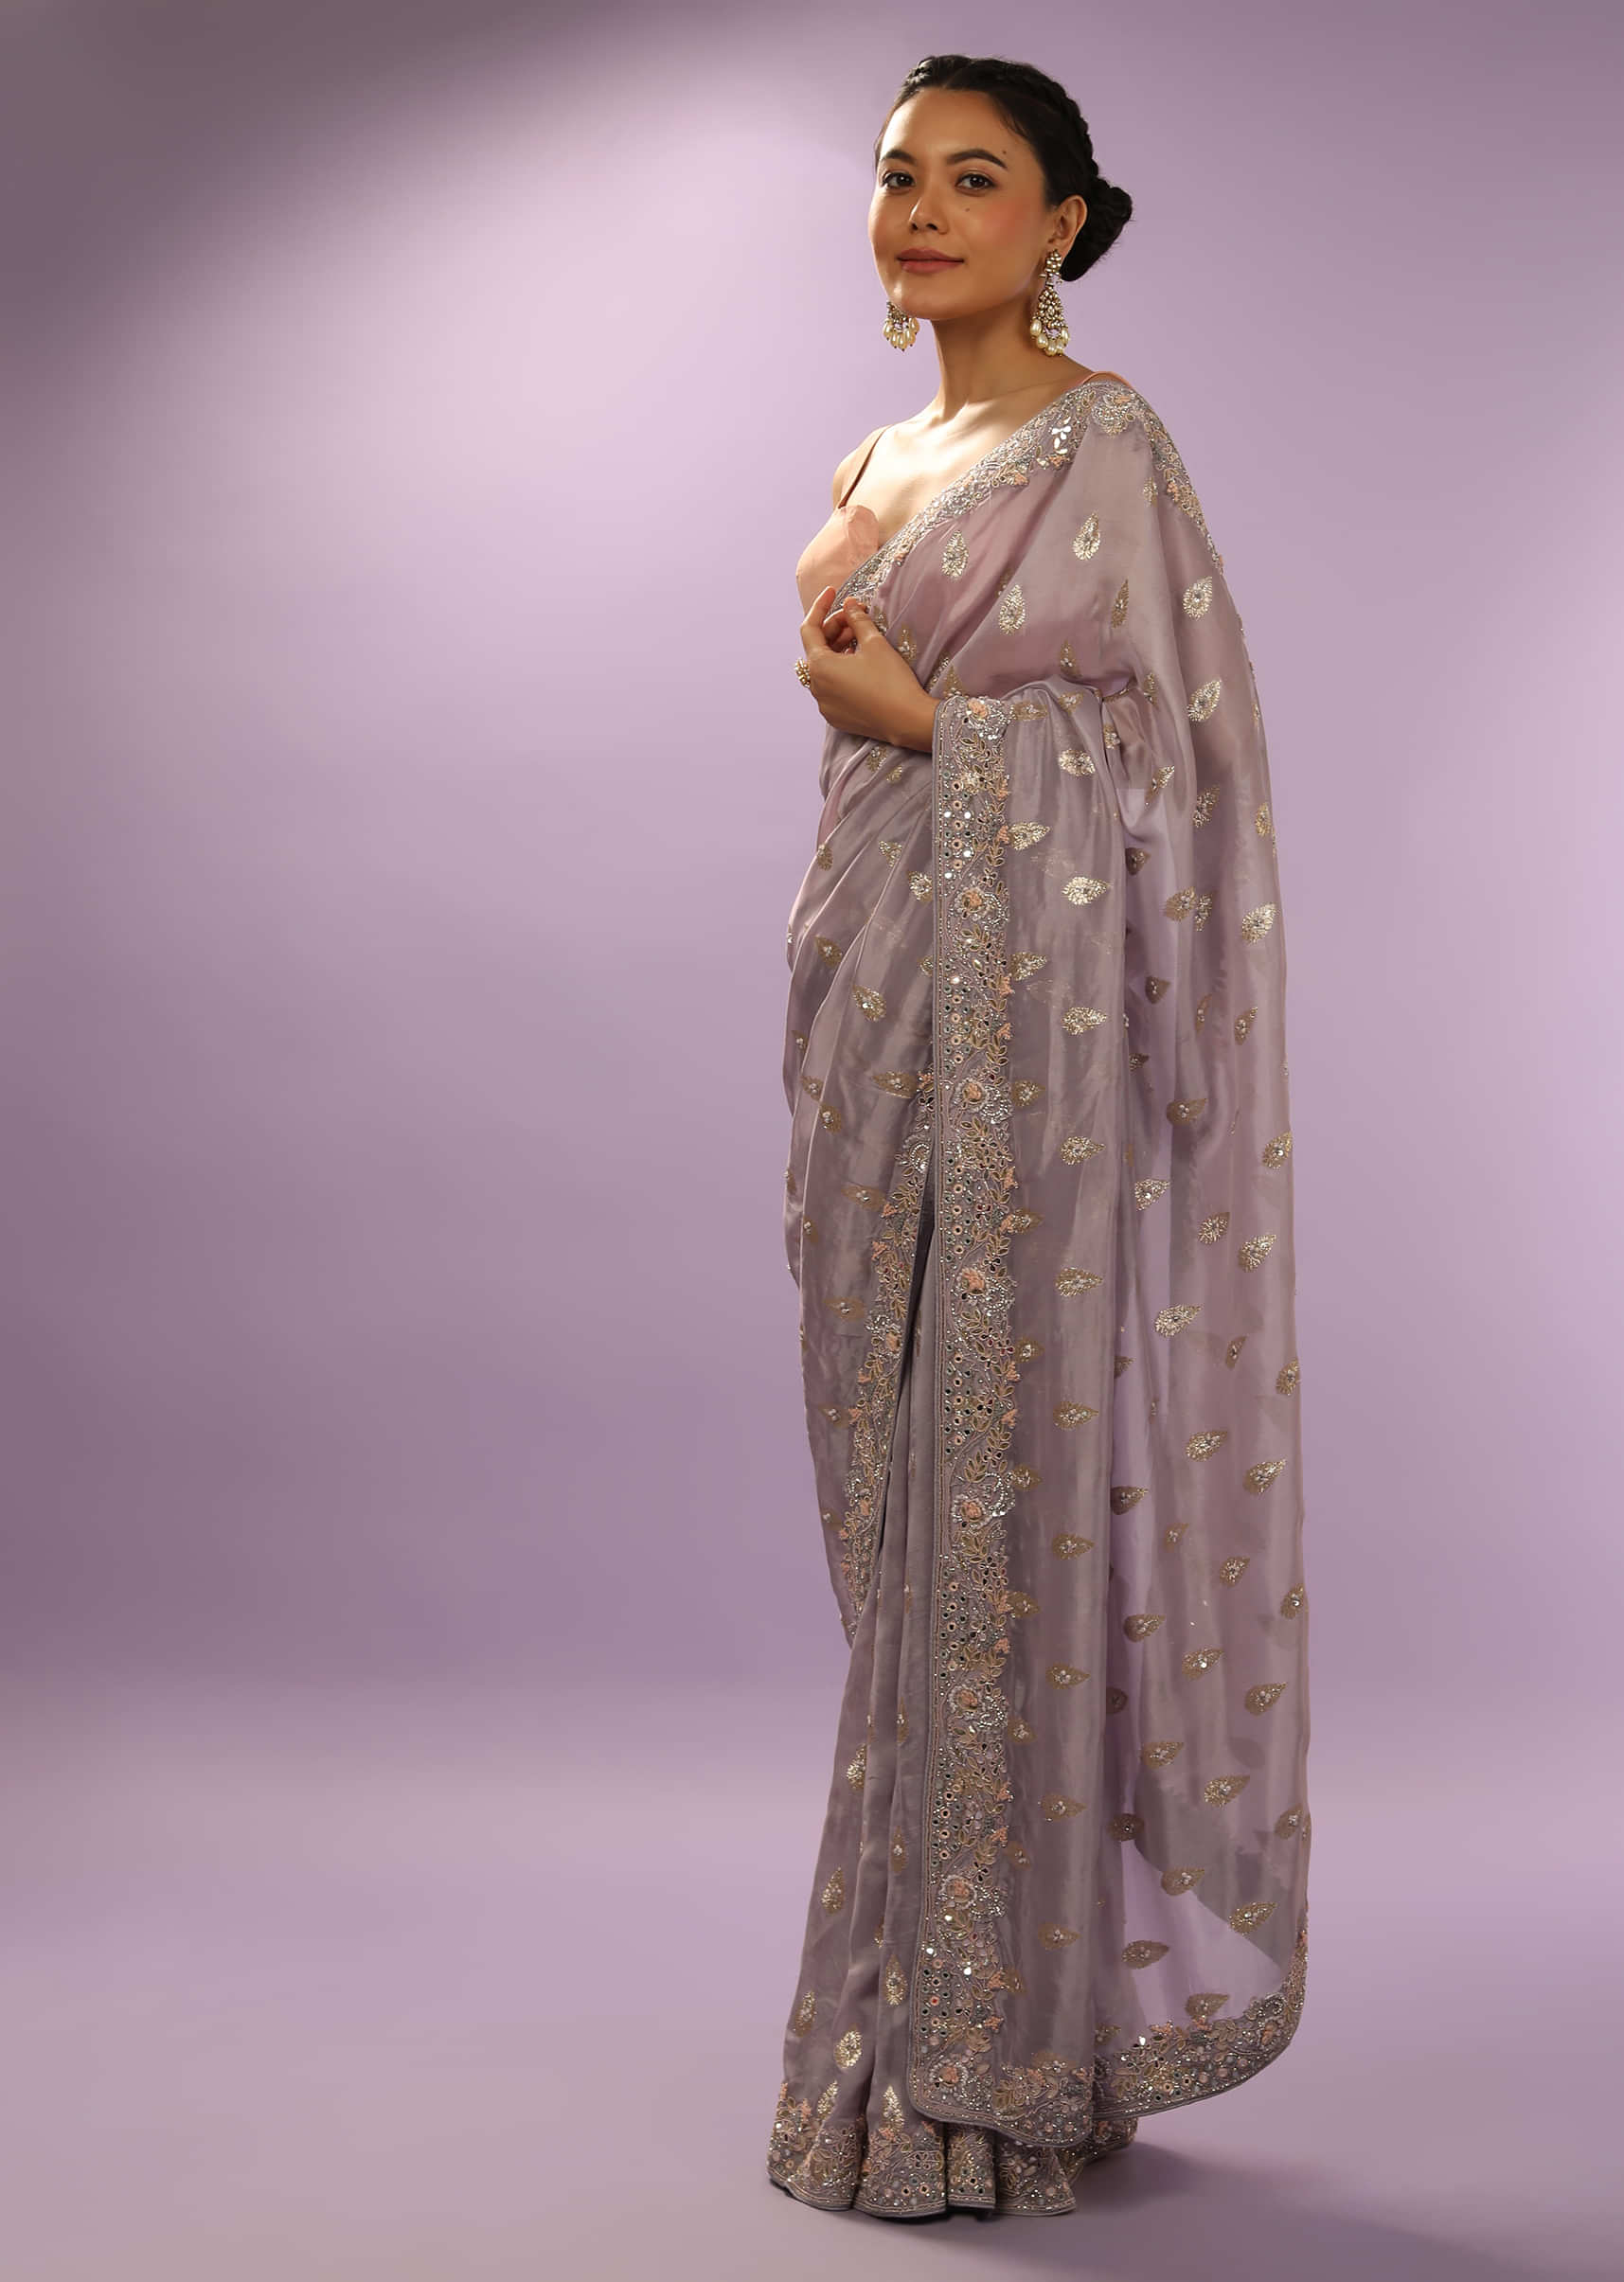 Dusty Lavender Saree In Organza Silk With Woven Buttis And Colorful Mirror Abla Embroidery On The Border 